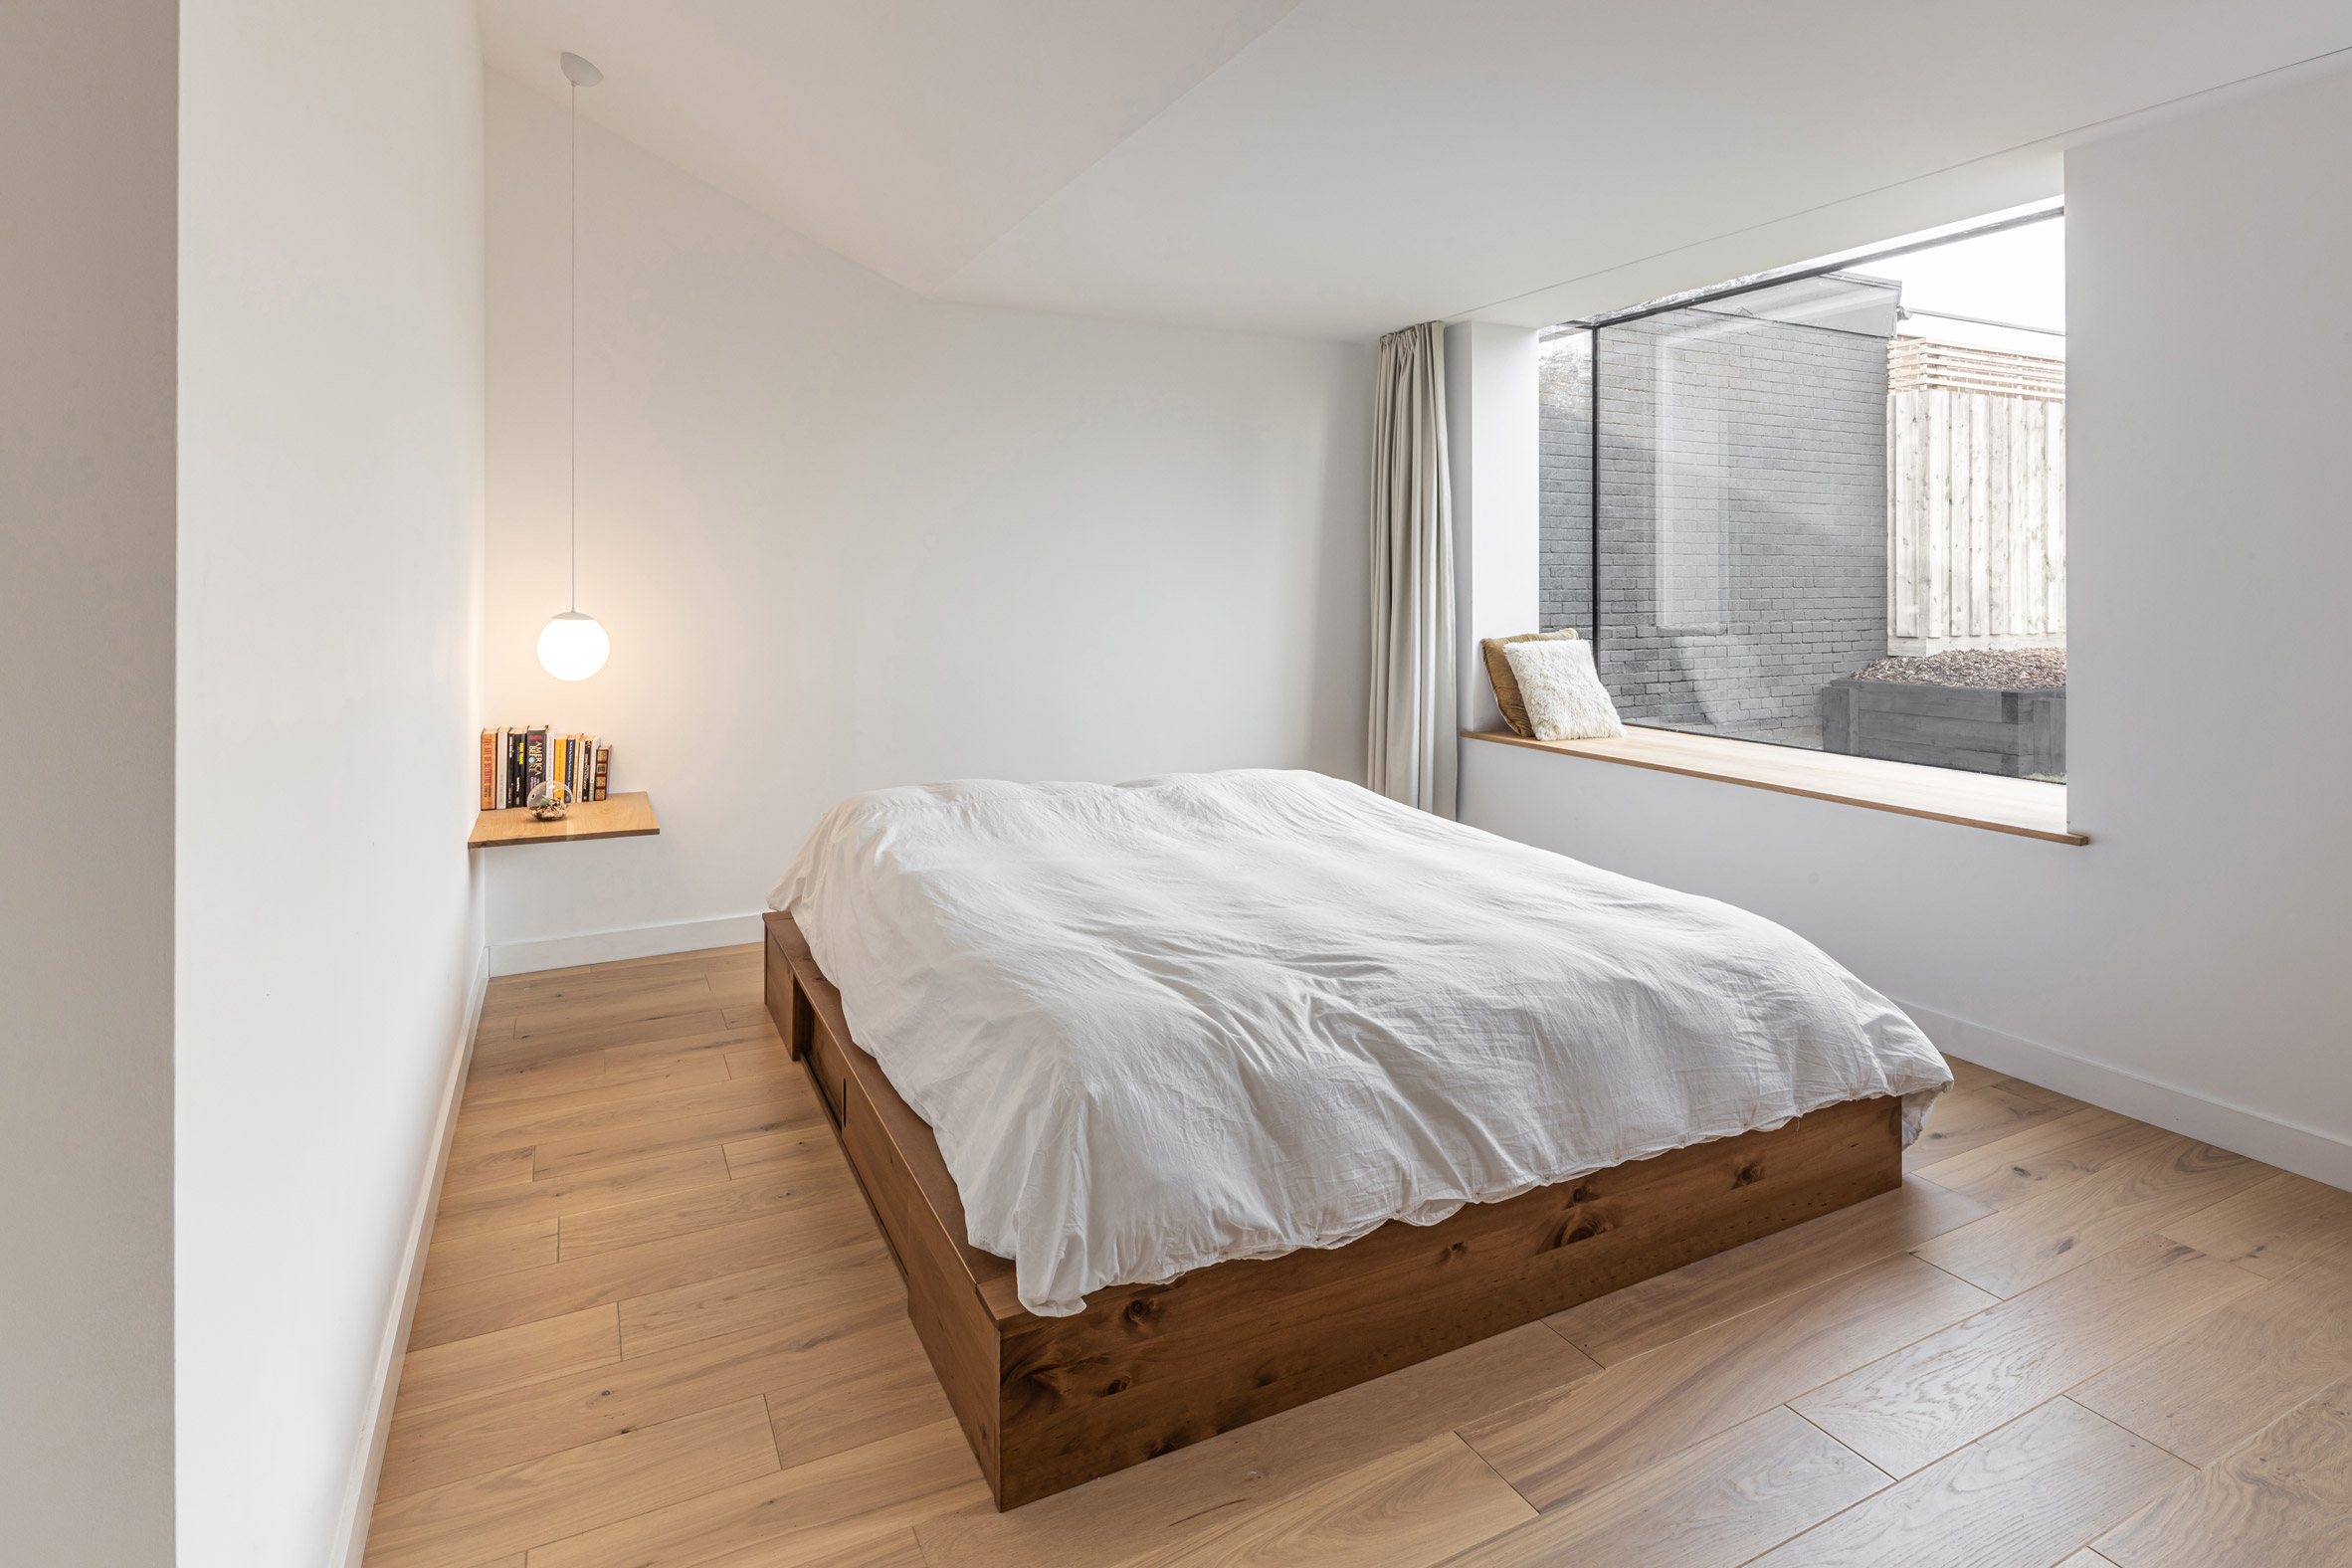 Master bedroom in Honey and Walnut House by Intervention Architecture